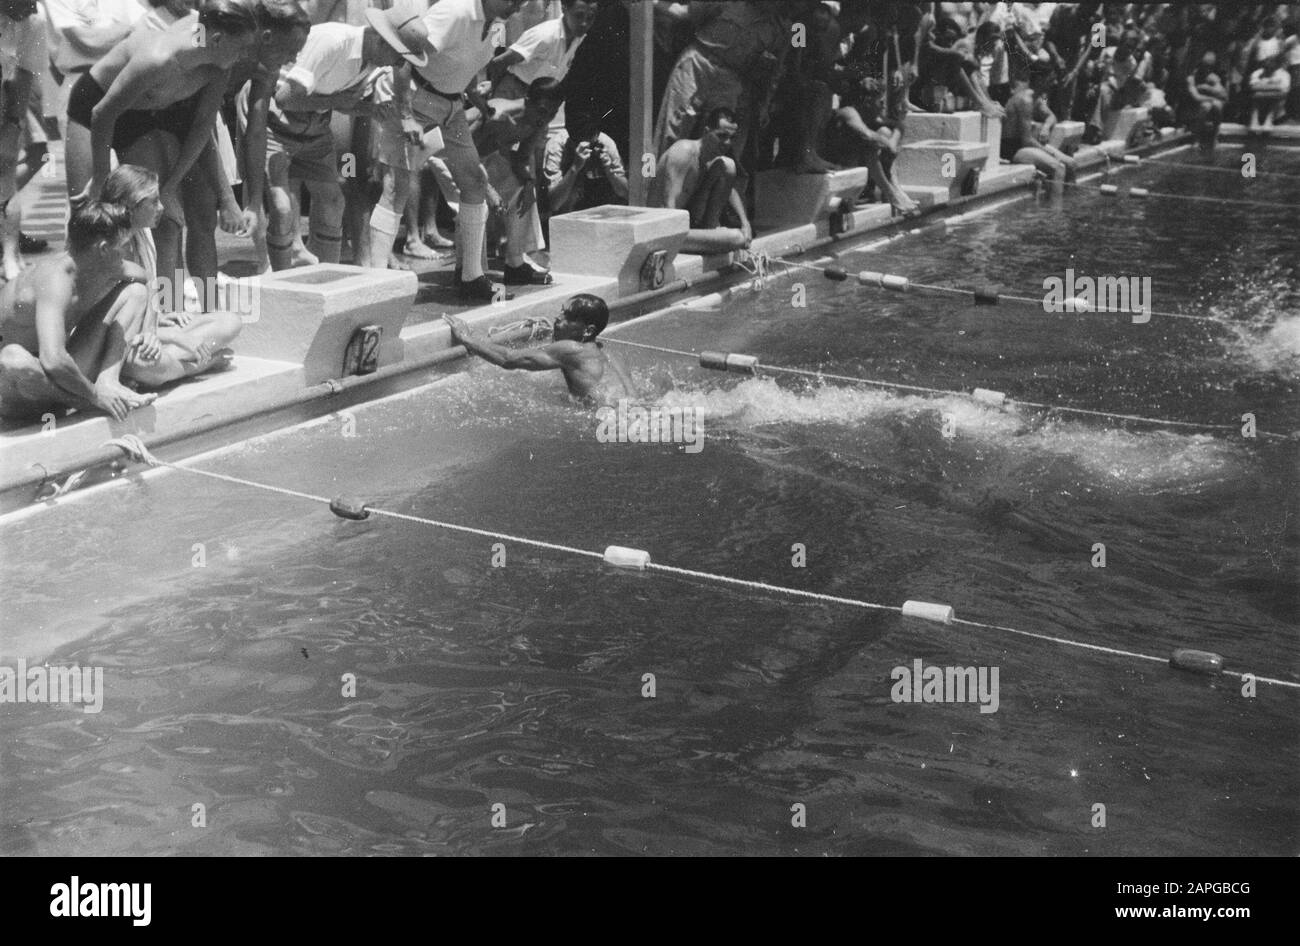 Swimming competitions Description: Collection Photo collection Service for Army Contacts Indonesia, photon number 203-4-1 Date: April 1947 Location: Indonesia, Dutch East Indies Stock Photo